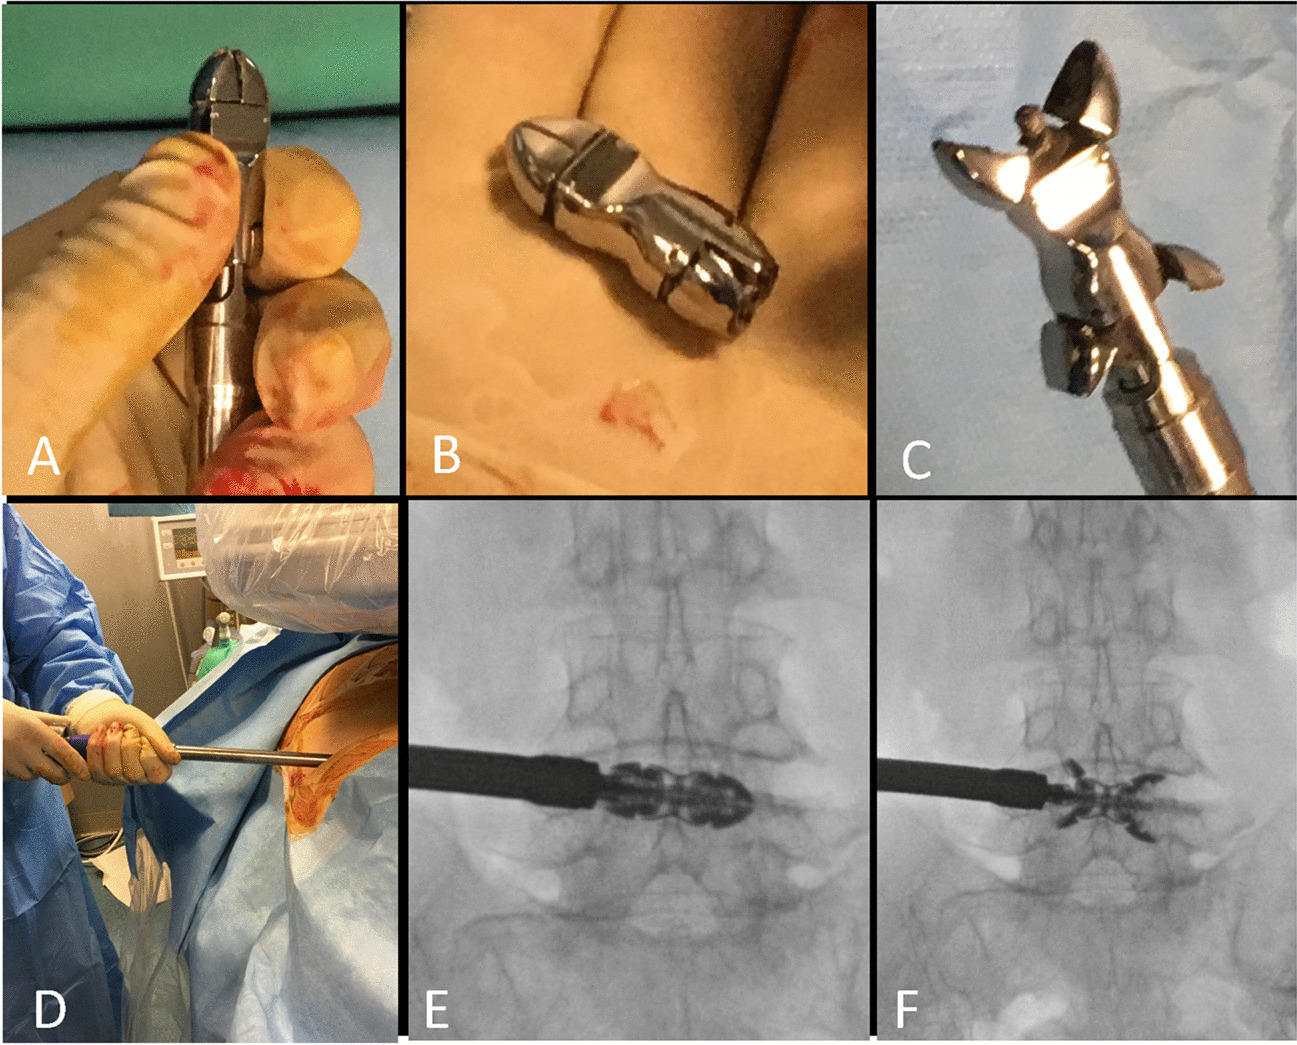 Feasibility, safety, and efficacy of a new percutaneous interspinous device: a retrospective multicenter study